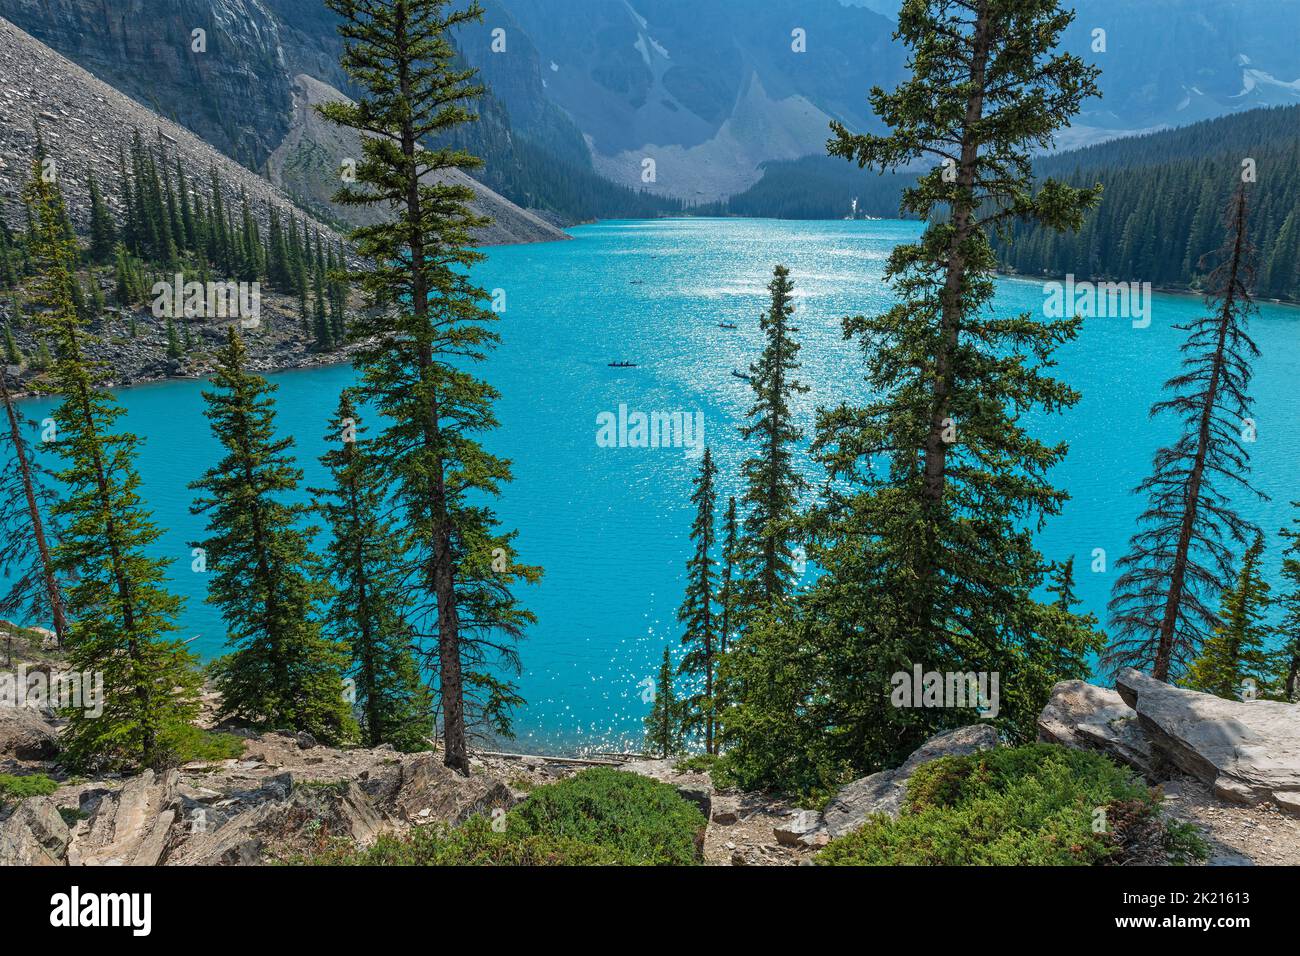 Moraine Lake with pine trees in  people doing kayak in summer, Banff national park, Alberta, Canada. Stock Photo